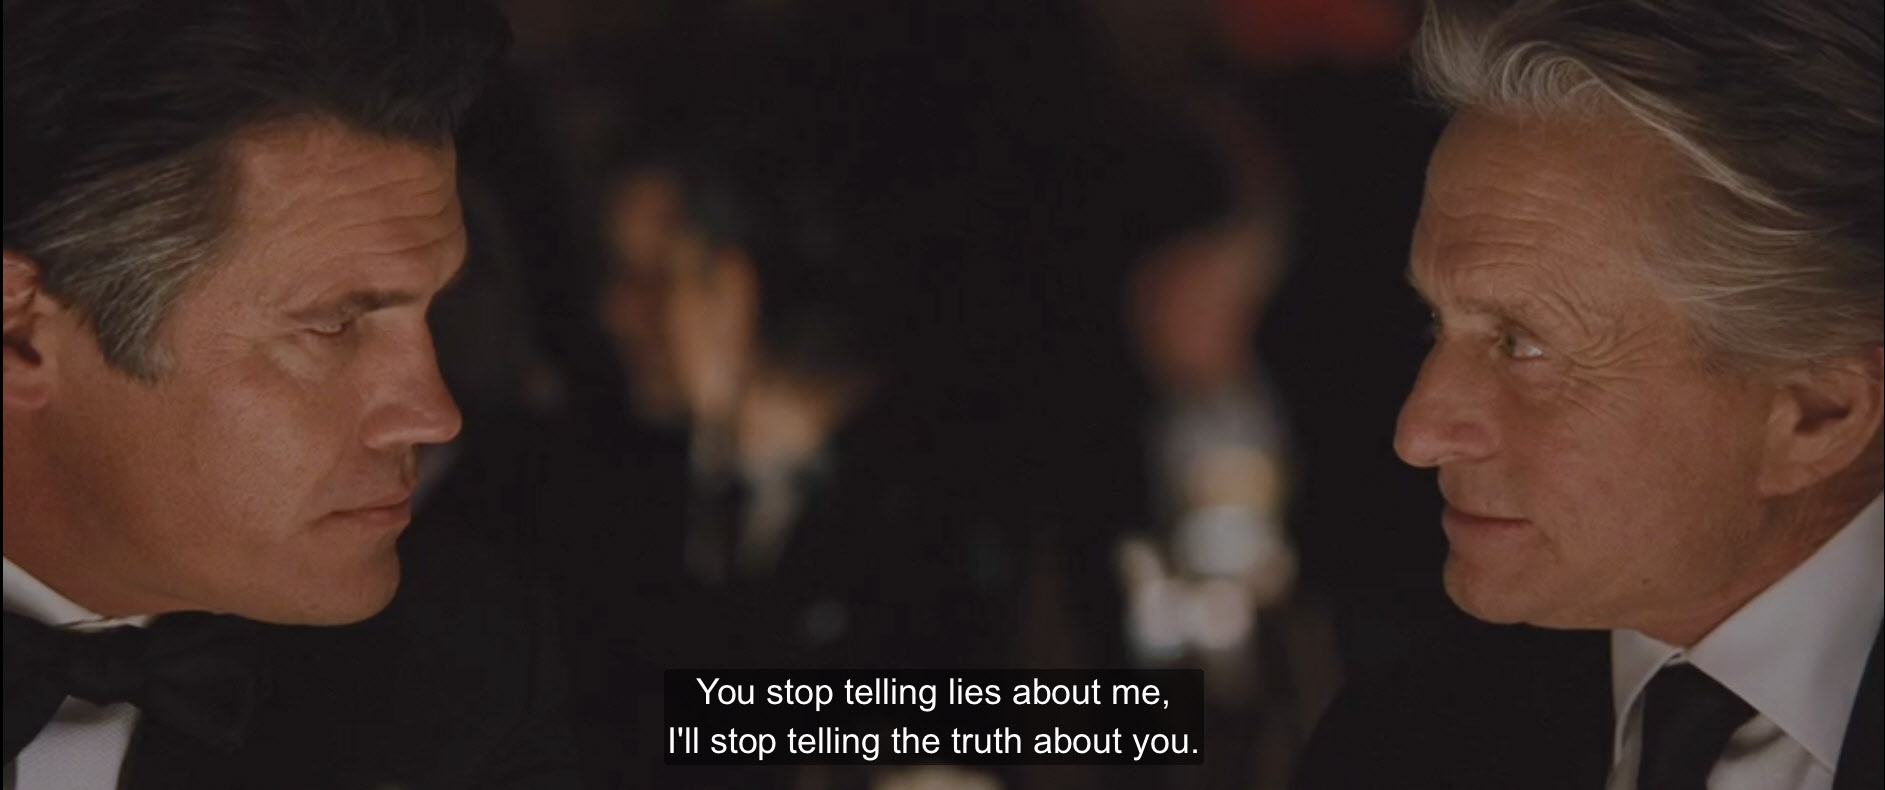 You Stop Telling lies about me I will stop telling the truth about you.jpg